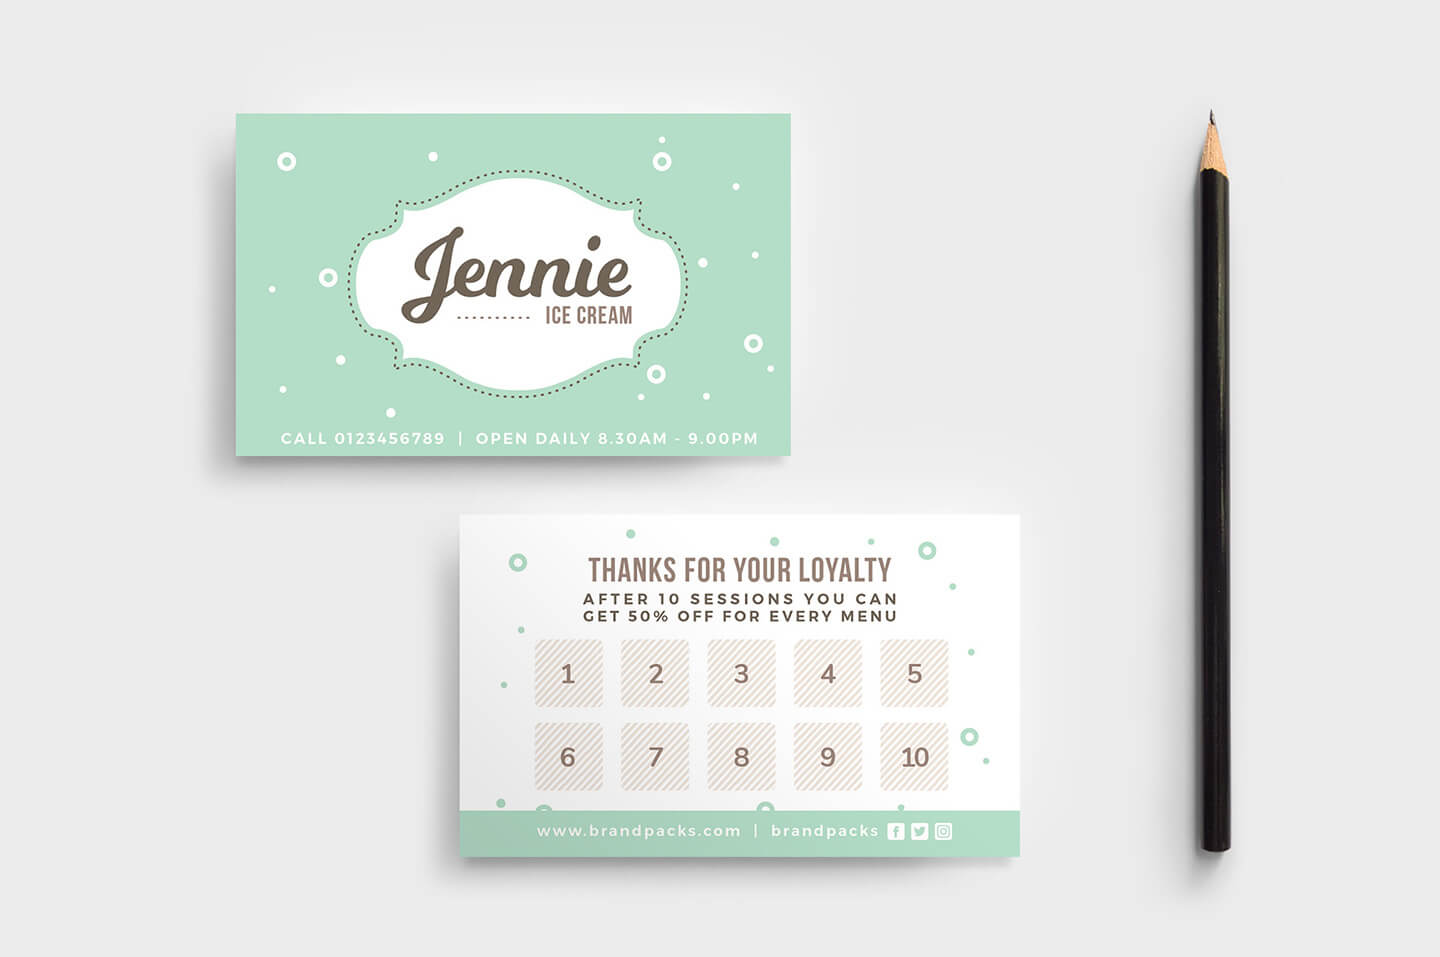 Free Loyalty Card Templates - Psd, Ai & Vector - Brandpacks With Regard To Business Punch Card Template Free